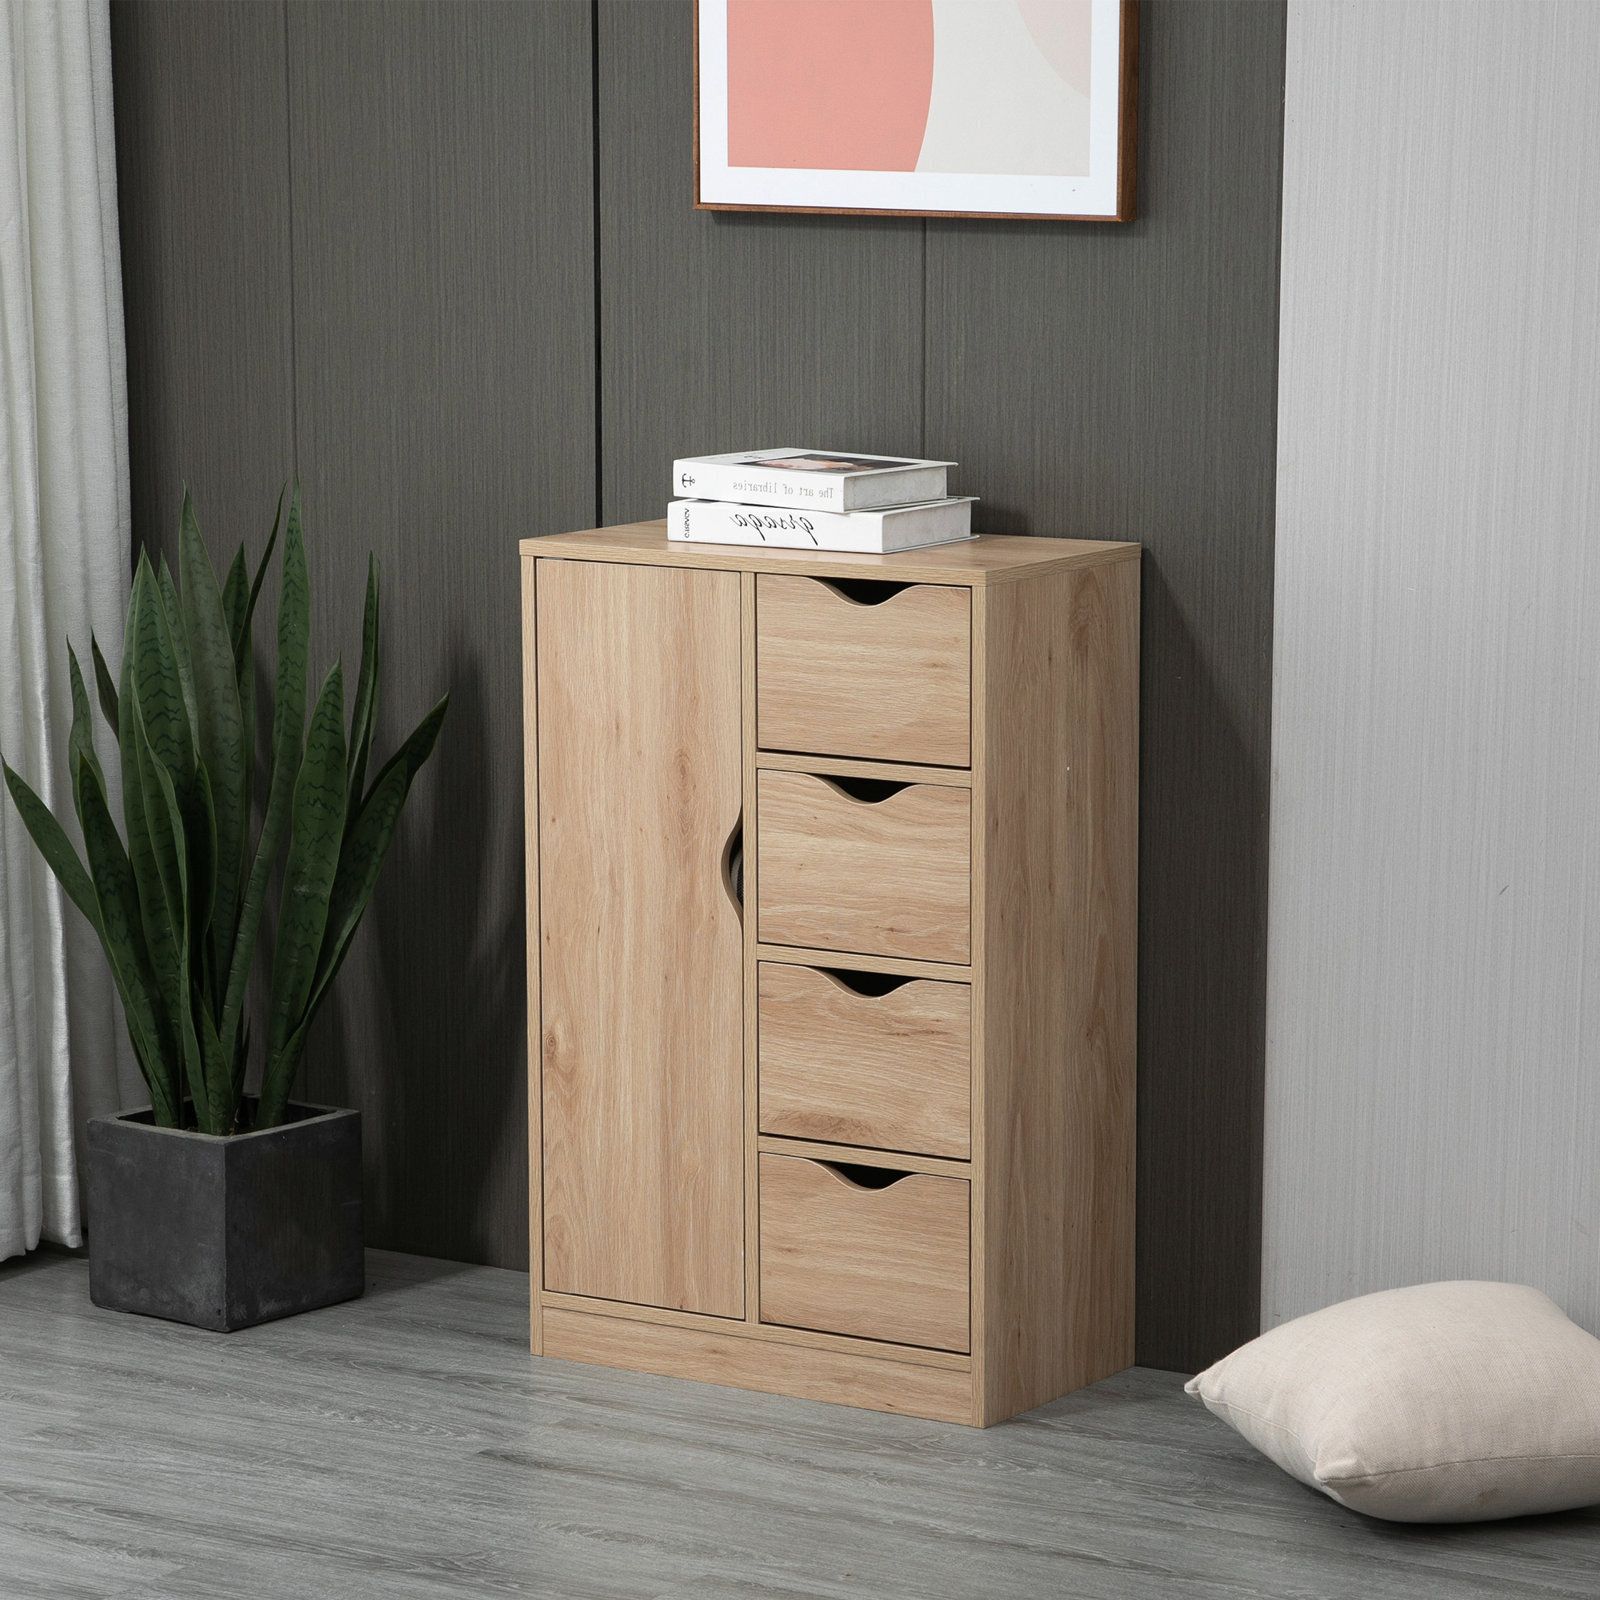 Small Wooden Cabinet With Drawers – Foter With Regard To Wood Cabinet With Drawers (View 7 of 20)